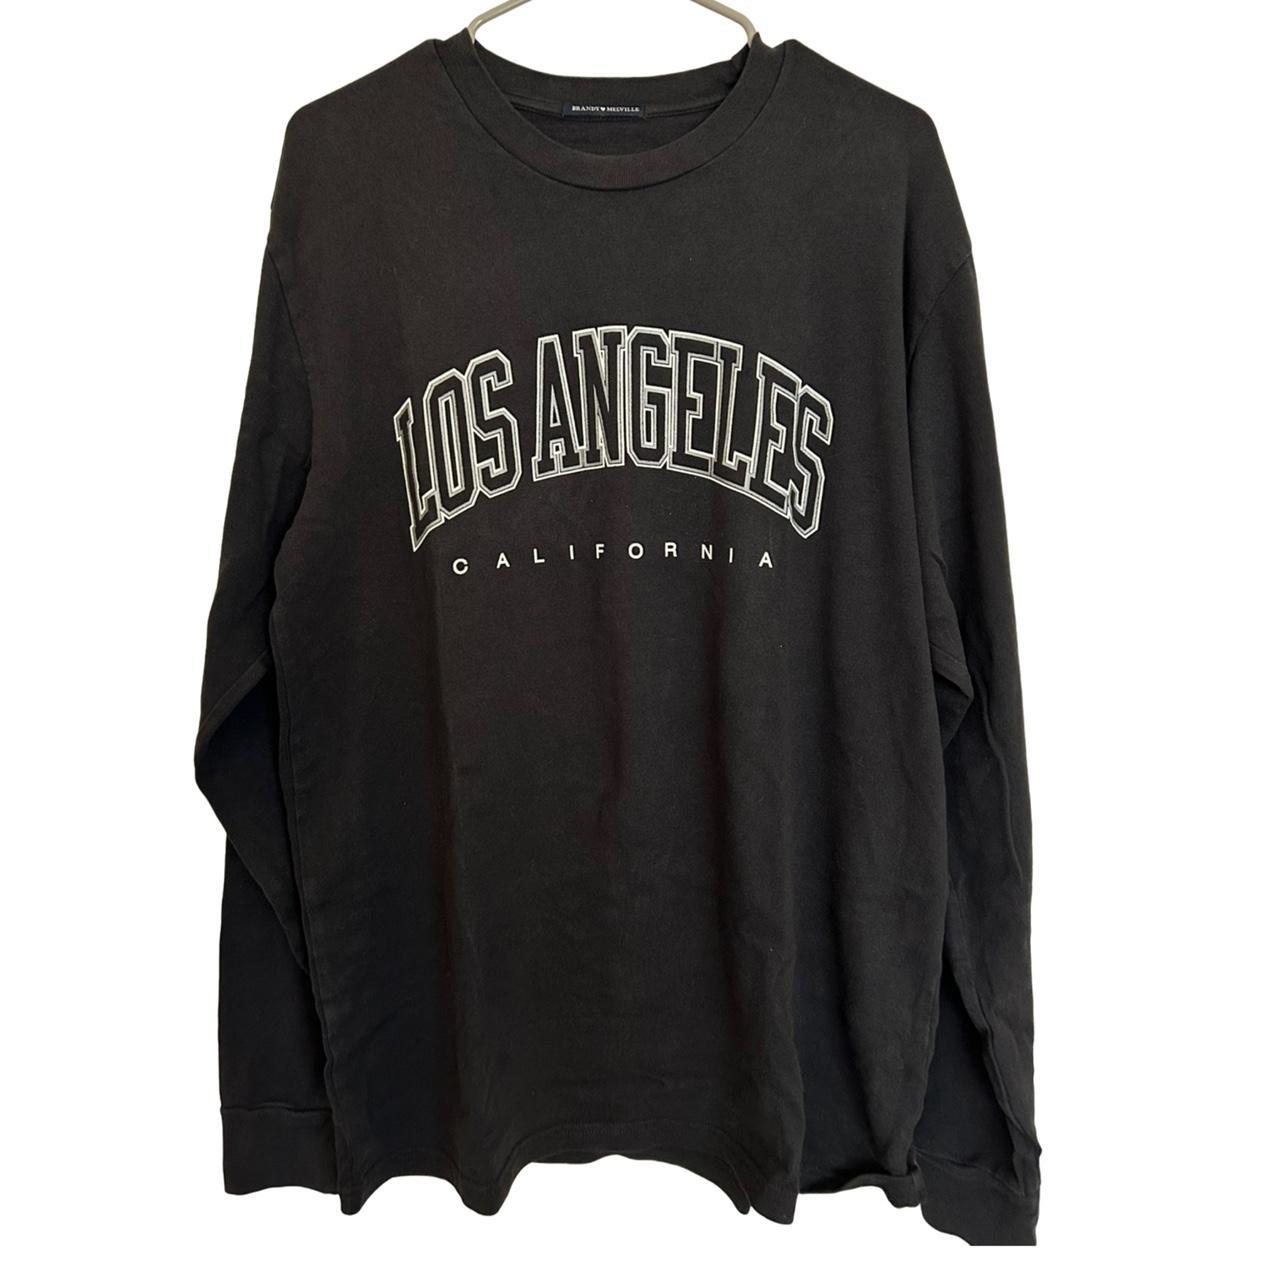 BRANDY MELVILLE grey oversized long sleeves shirt with graphic prints